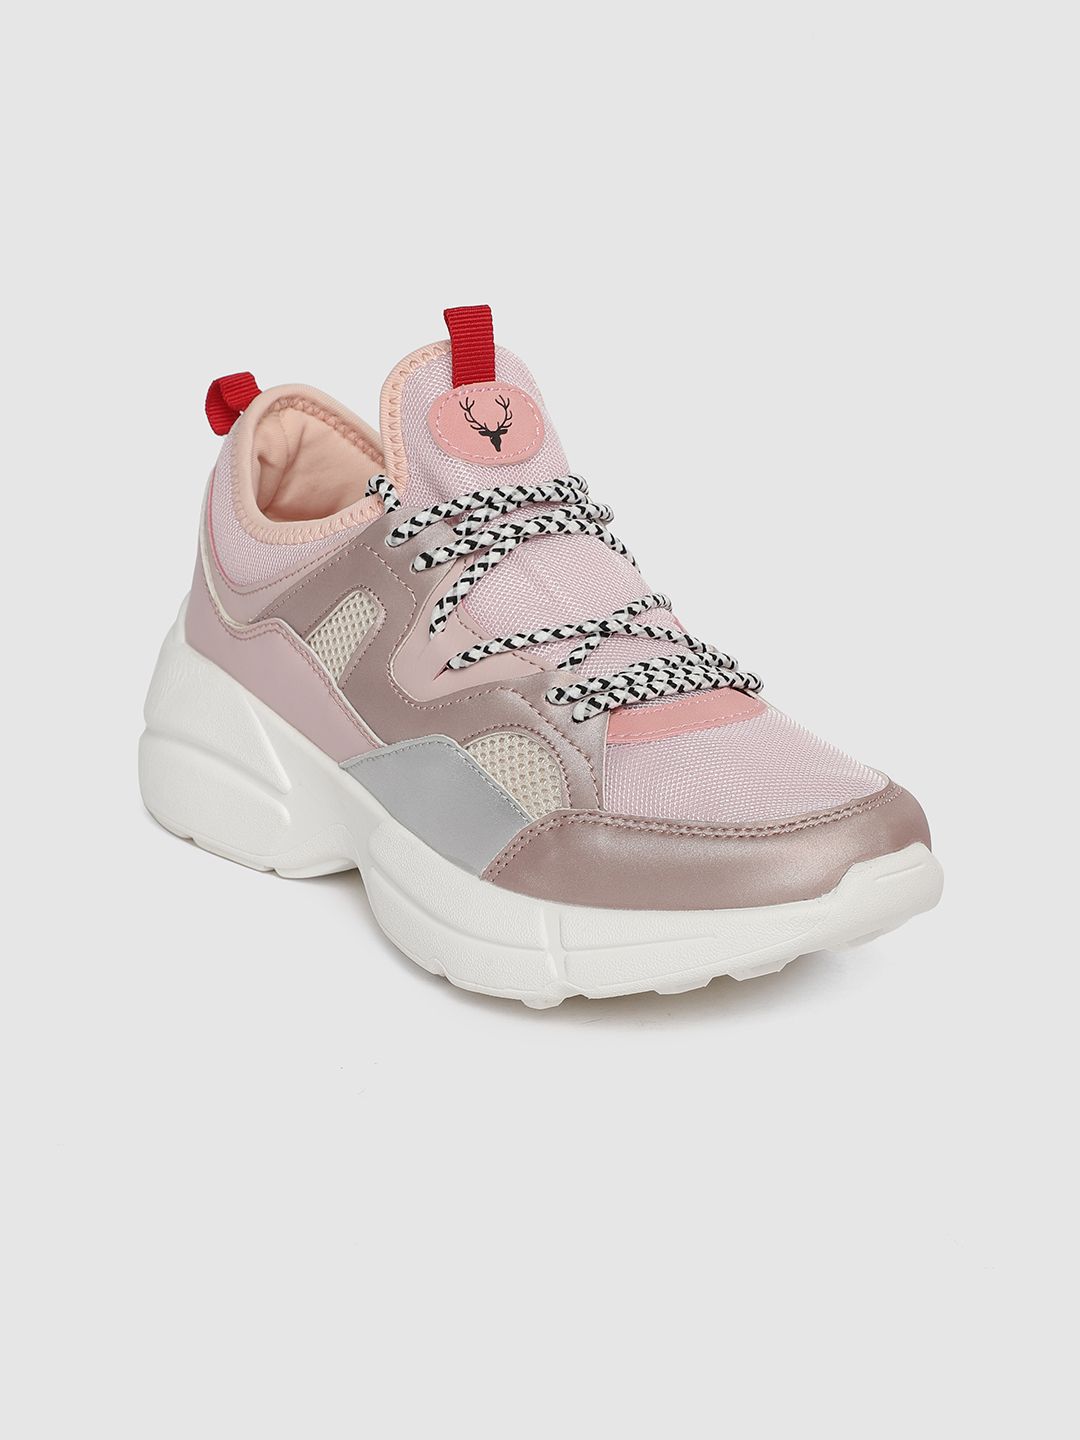 Allen Solly Women Dusty Pink Colourblocked Sneakers Price in India